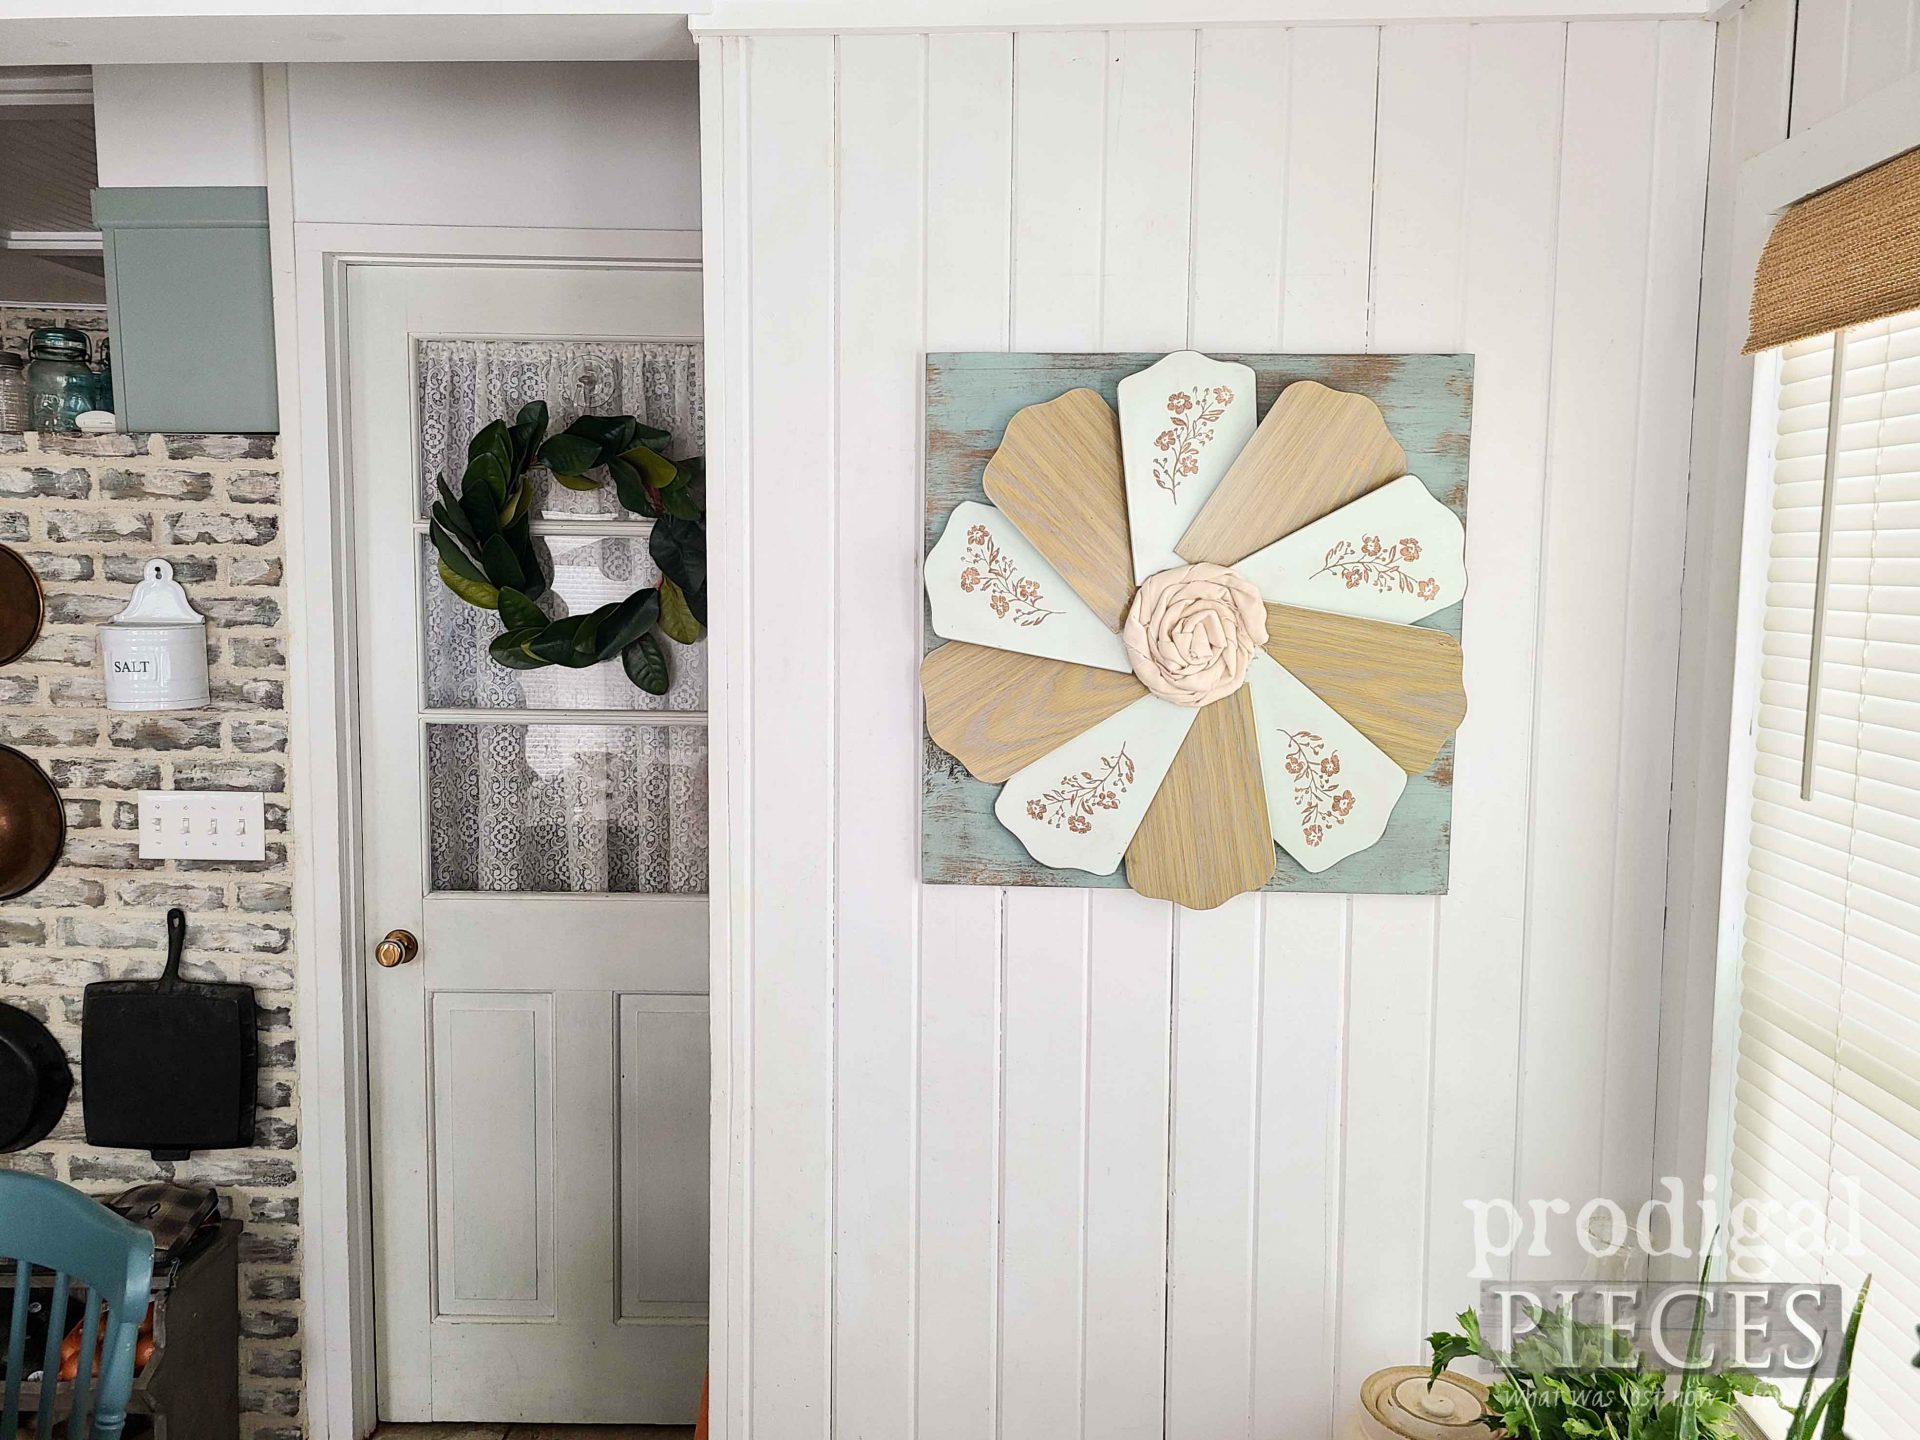 Farmhouse Repurposed Wall Art from Upcycled Ceiling Fan Blades by Larissa of Prodigal Pieces | prodigalpieces.com #prodigalpieces #farmhouse #diy #upcycled